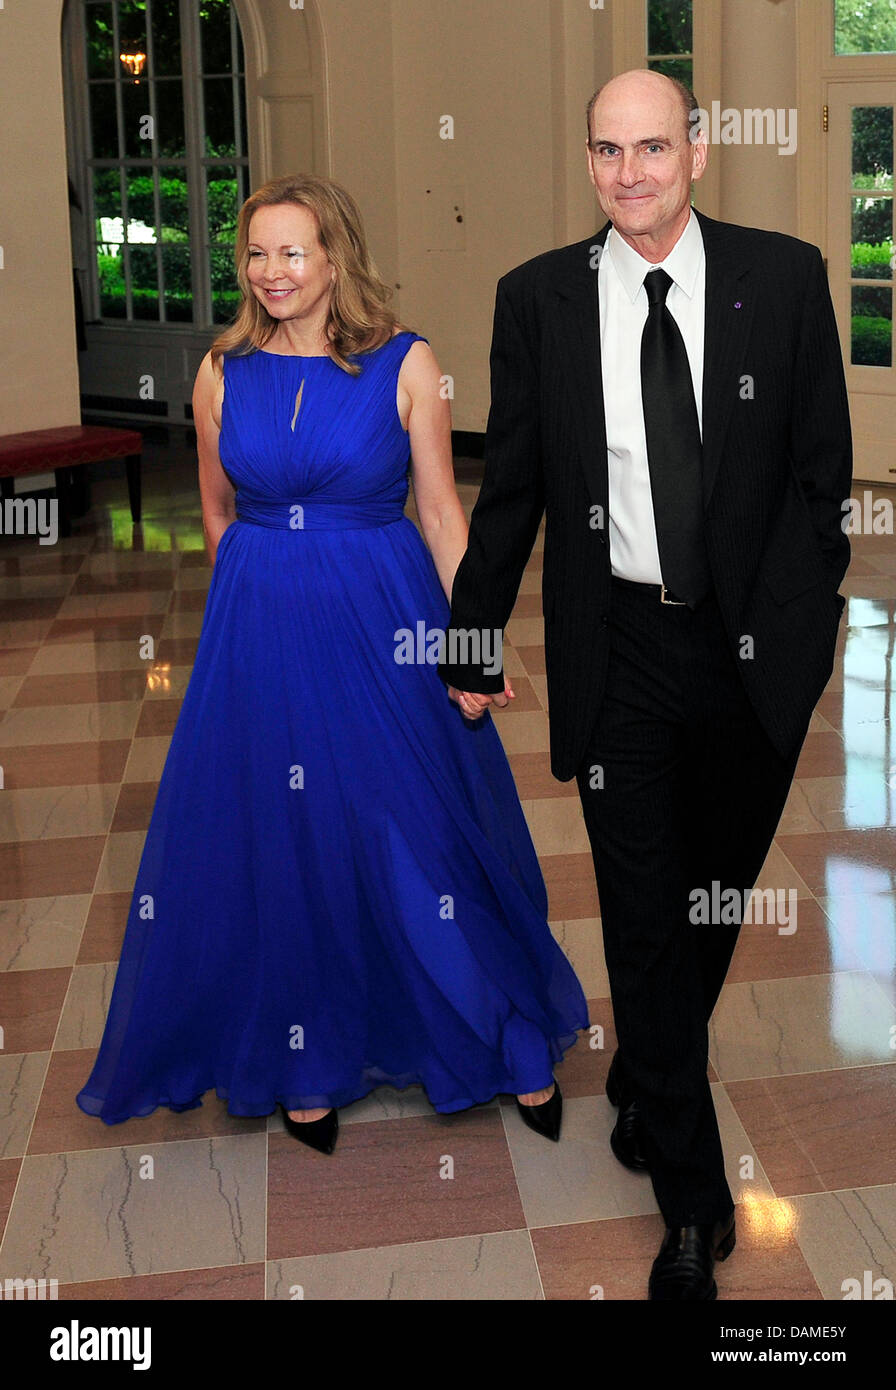 James Taylor and Caroline Taylor arrive for a State Dinner in honor of Chancellor Angela Merkel of Germany at the White House in Washington, D.C. on Tuesday, June 7, 2011 Credit: Ron Sachs / CNP Stock Photo